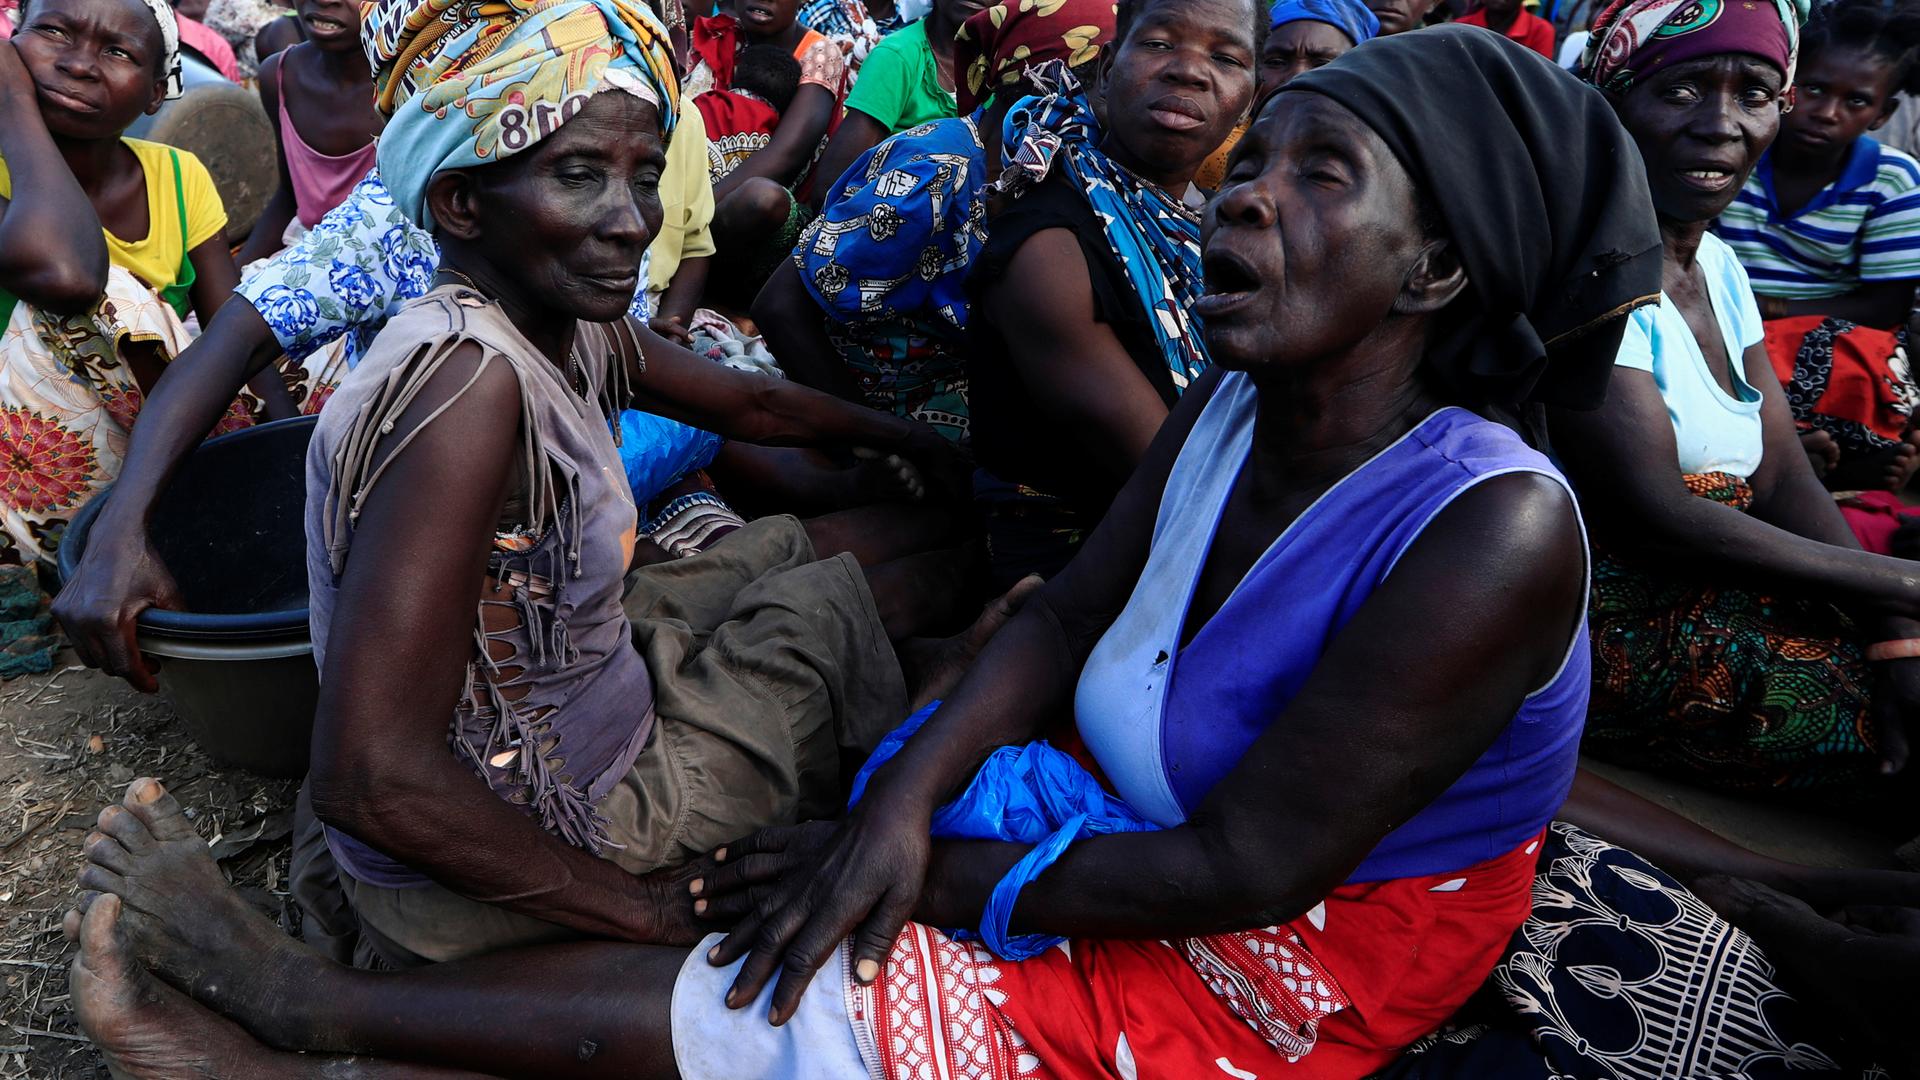 Women sit on the ground wearing colorful head wraps waiting for aid. 